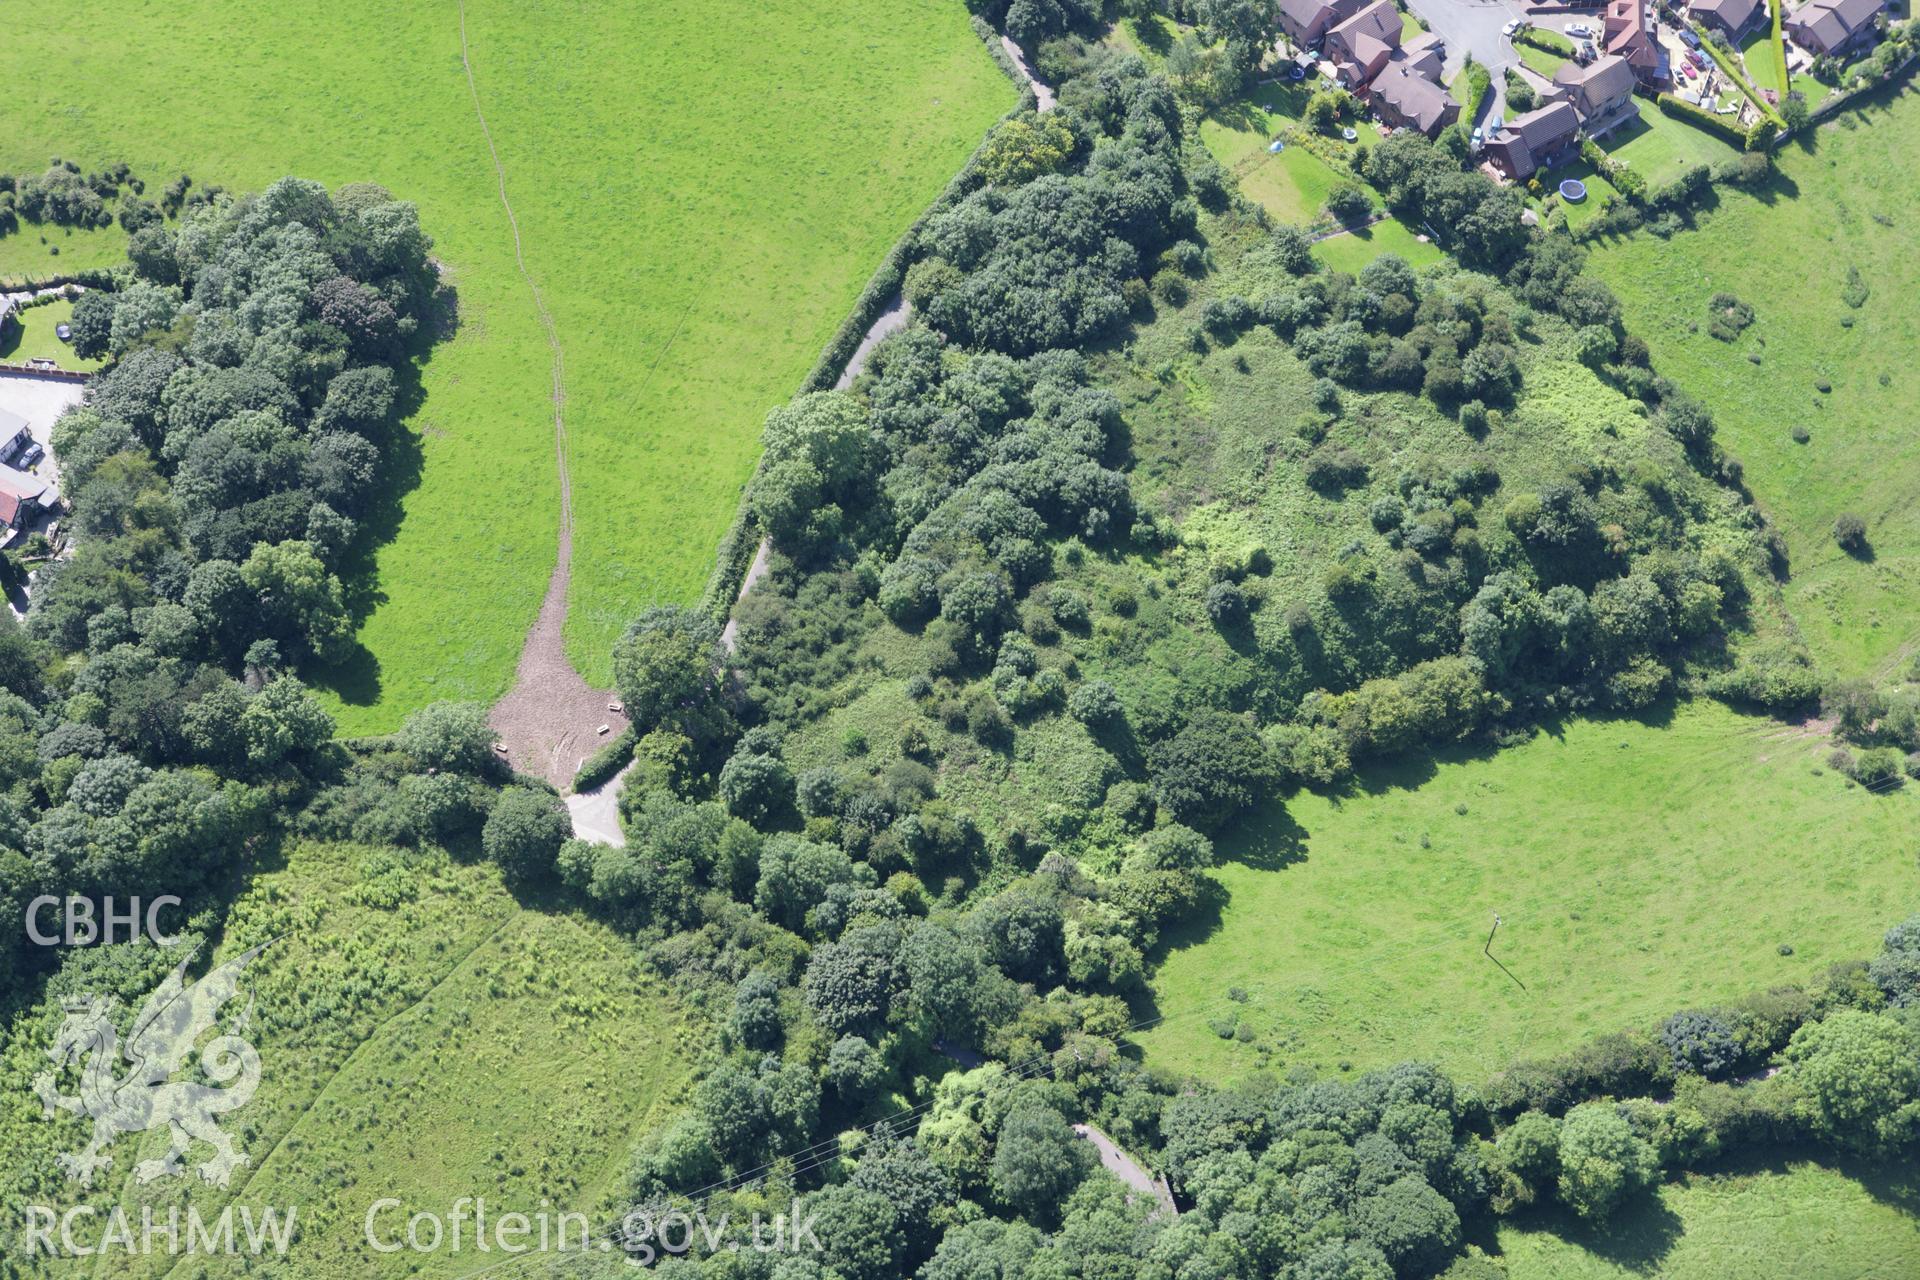 RCAHMW colour oblique aerial photograph of field entrance near Siamber-Wen. Taken on 31 July 2007 by Toby Driver